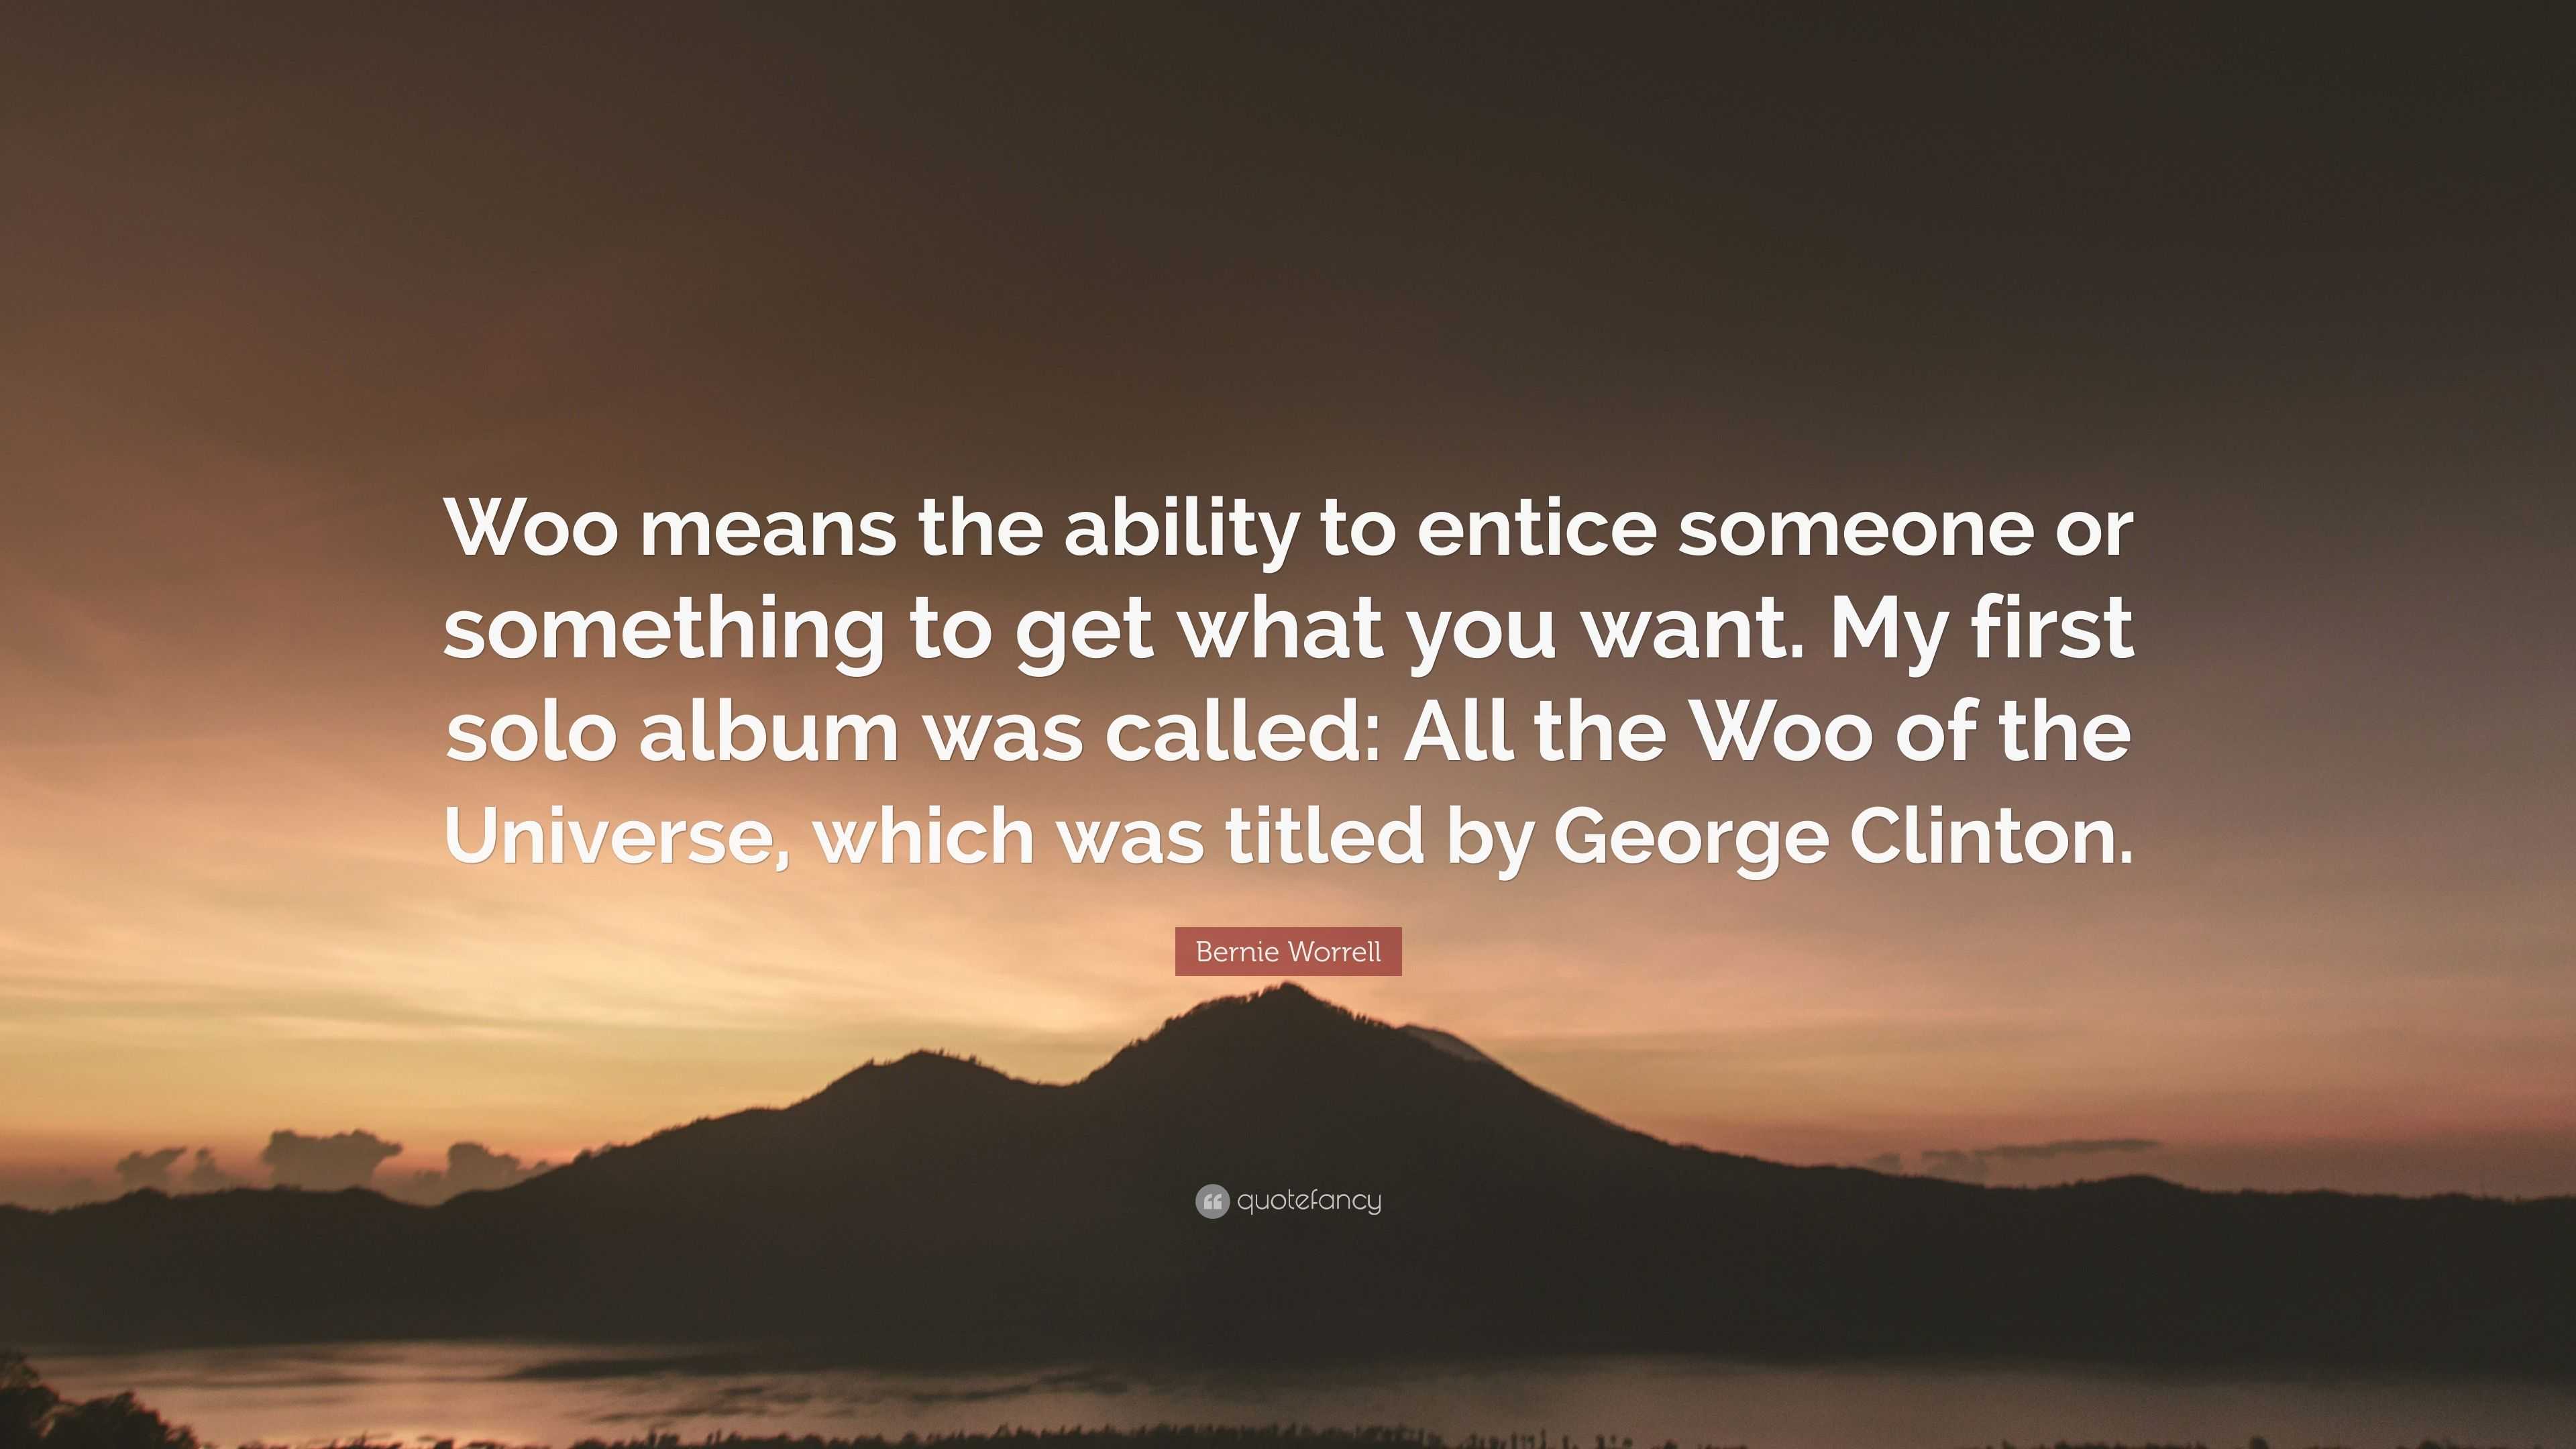 Bernie Worrell quote: Woo means the ability to entice someone or